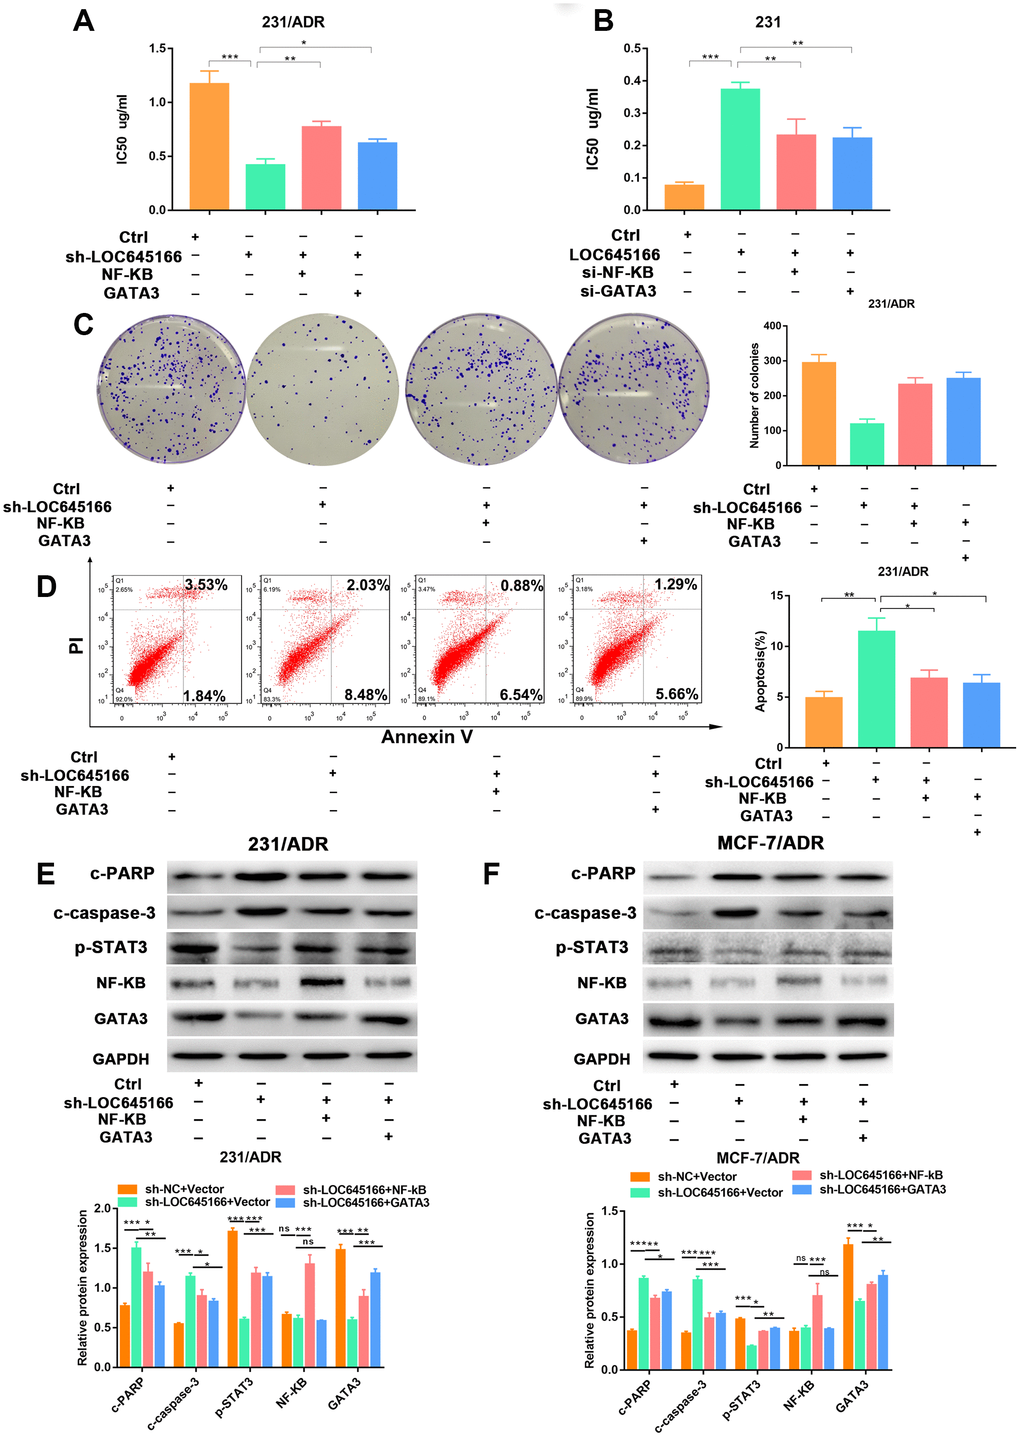 The biological role of lnc-LOC645166 in breast cancer cells was mediated by NF-κB and GATA3 and E2F3. (A) CCK-8 assays were performed to determine the ADR sensitivity of MCF-7/ADR cells cotransfected with sh-LOC645166 and pcDNA-NF-κB or pcDNA-GATA3. (B) CCK-8 assays were performed to determine the ADR sensitivity of 231 cells cotransfected with lnc-LOC645166 and si-NF-κB or si-GATA3. (C) Colony formation ability of 231/ADR cells was assessed when cotransfected with sh-LOC645166 and pcDNA-NF-κB or pcDNA-GATA3. (D) The apoptosis rate of 231/ADR cell cotransfected with sh-LOC645166 and pcDNA-NF-κB or pcDNA-GATA3 was measured by flow cytometric analysis. (E, F) Western blot assays were used to measure the expression of NF-κB, GATA3, c-PARP, c-Caspase-3 and p-STAT3 in 231/ADR and MCF-7/ADR cells cotransfected with sh-LOC645166 and pcDNA-NF-κB or pcDNA-GATA3. Data are shown as means ± SD. *p 